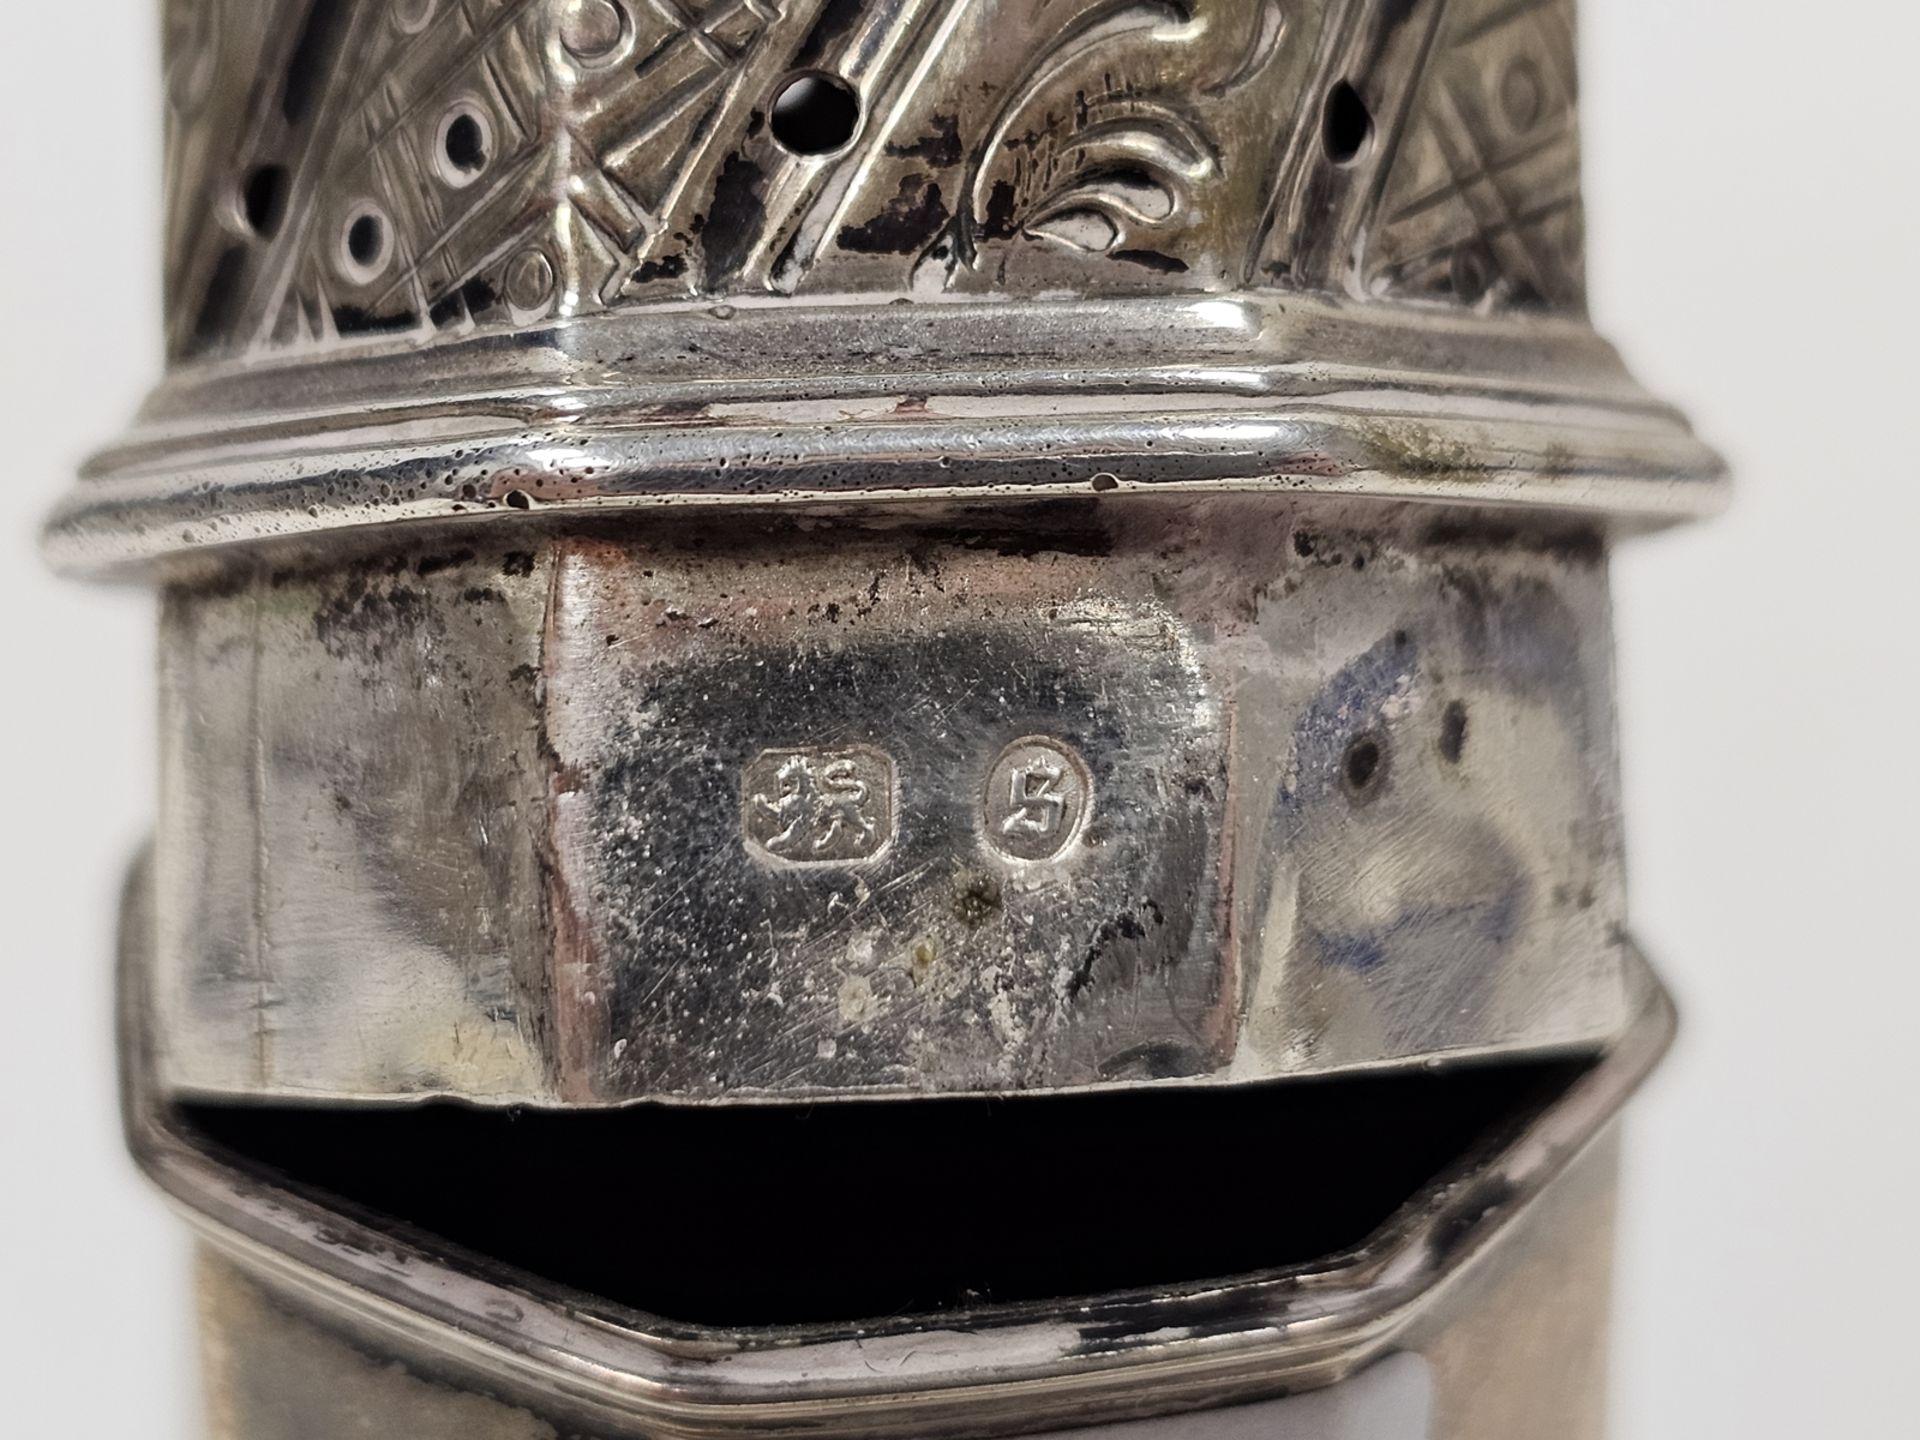 Silver sugar caster by Stokes & Ireland Limited, Birmingham 1892, of panel baluster form with - Image 3 of 3